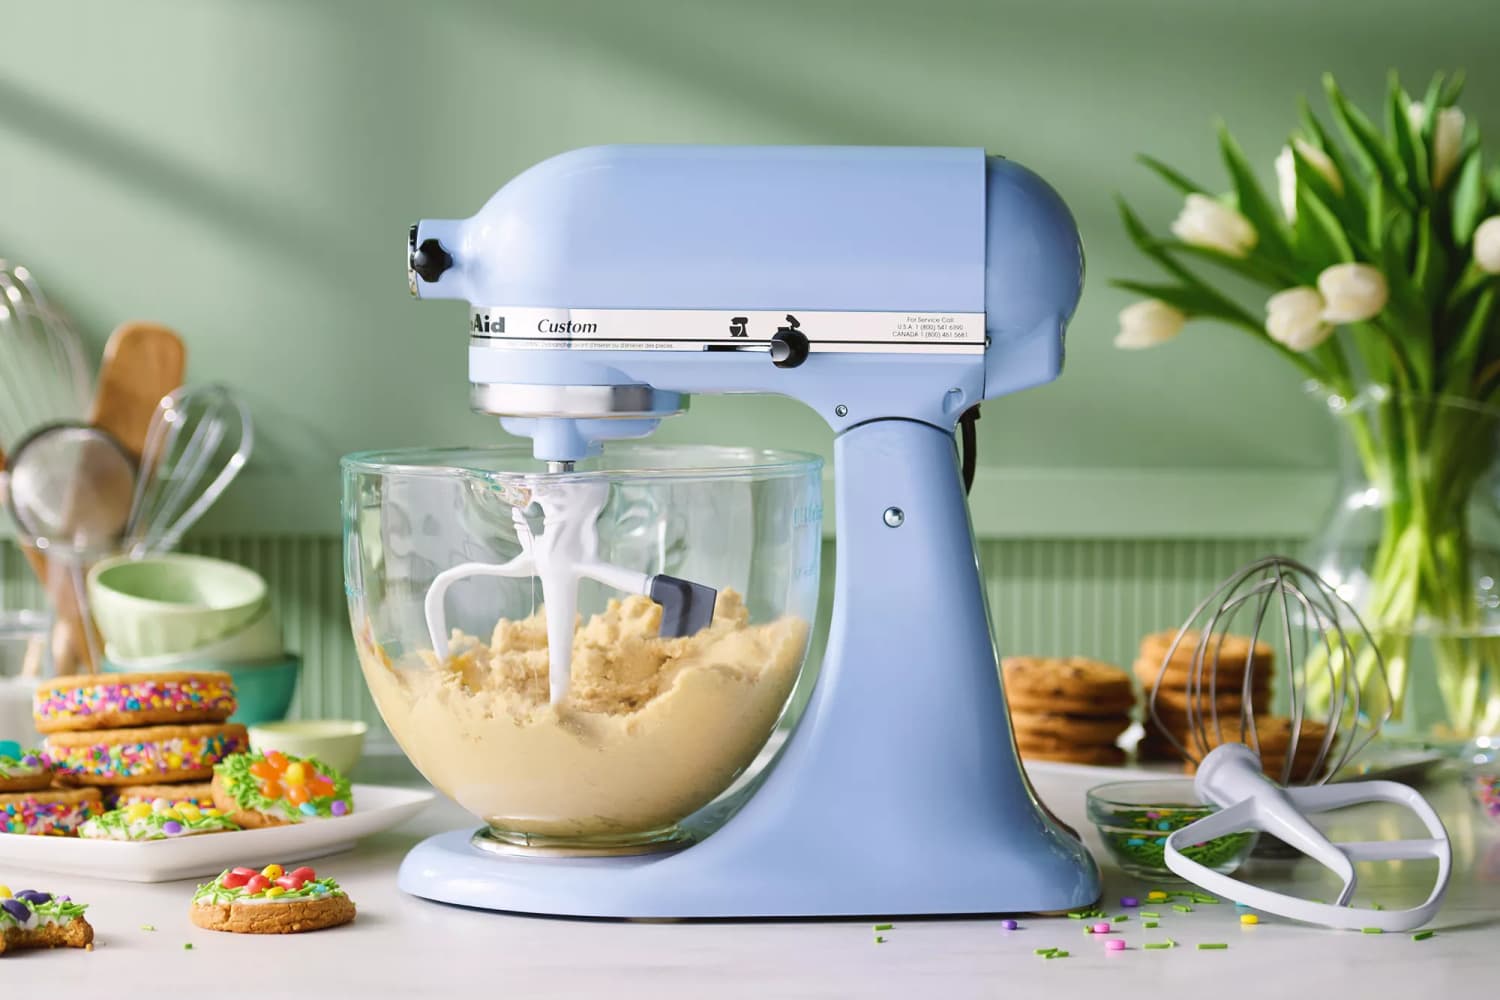 Walmart has five KitchenAid Stand Mixers on sale right now